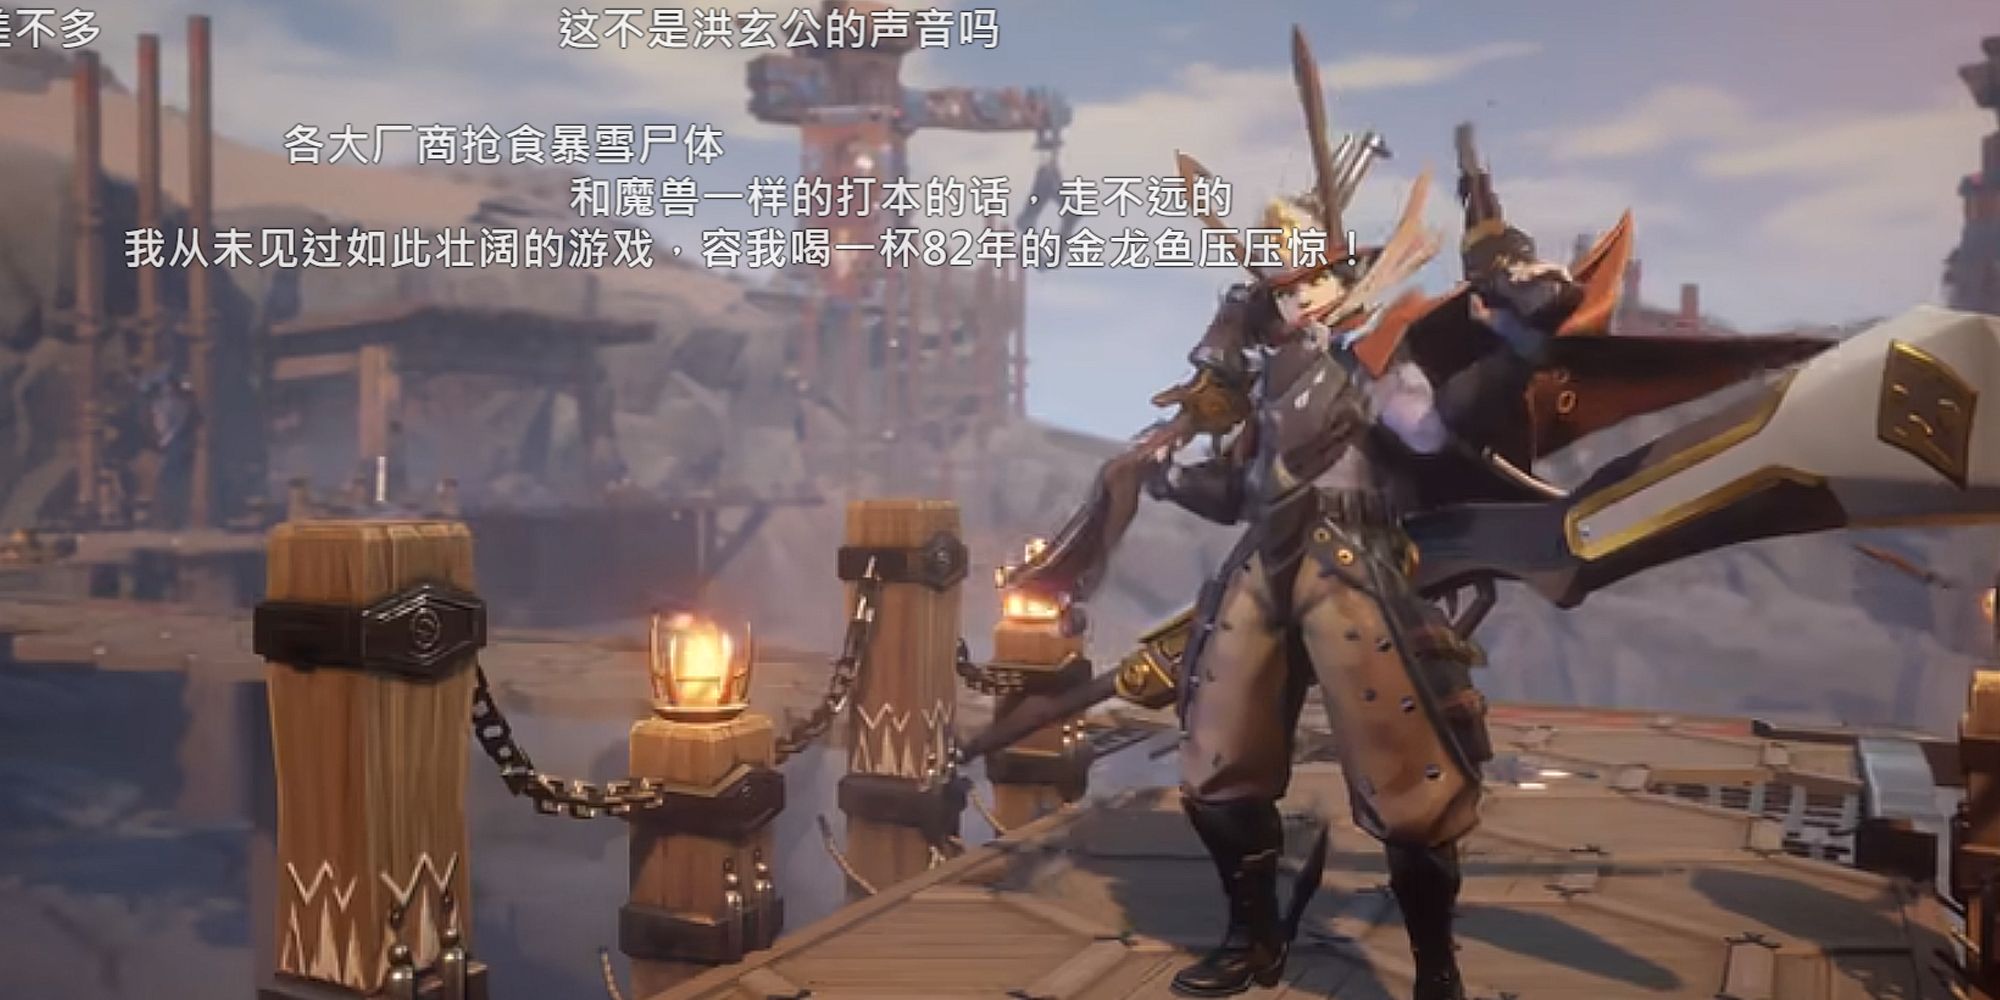 Tarisland character standing on a port with a giant rifle on their back, holding a pistol pointed at the air